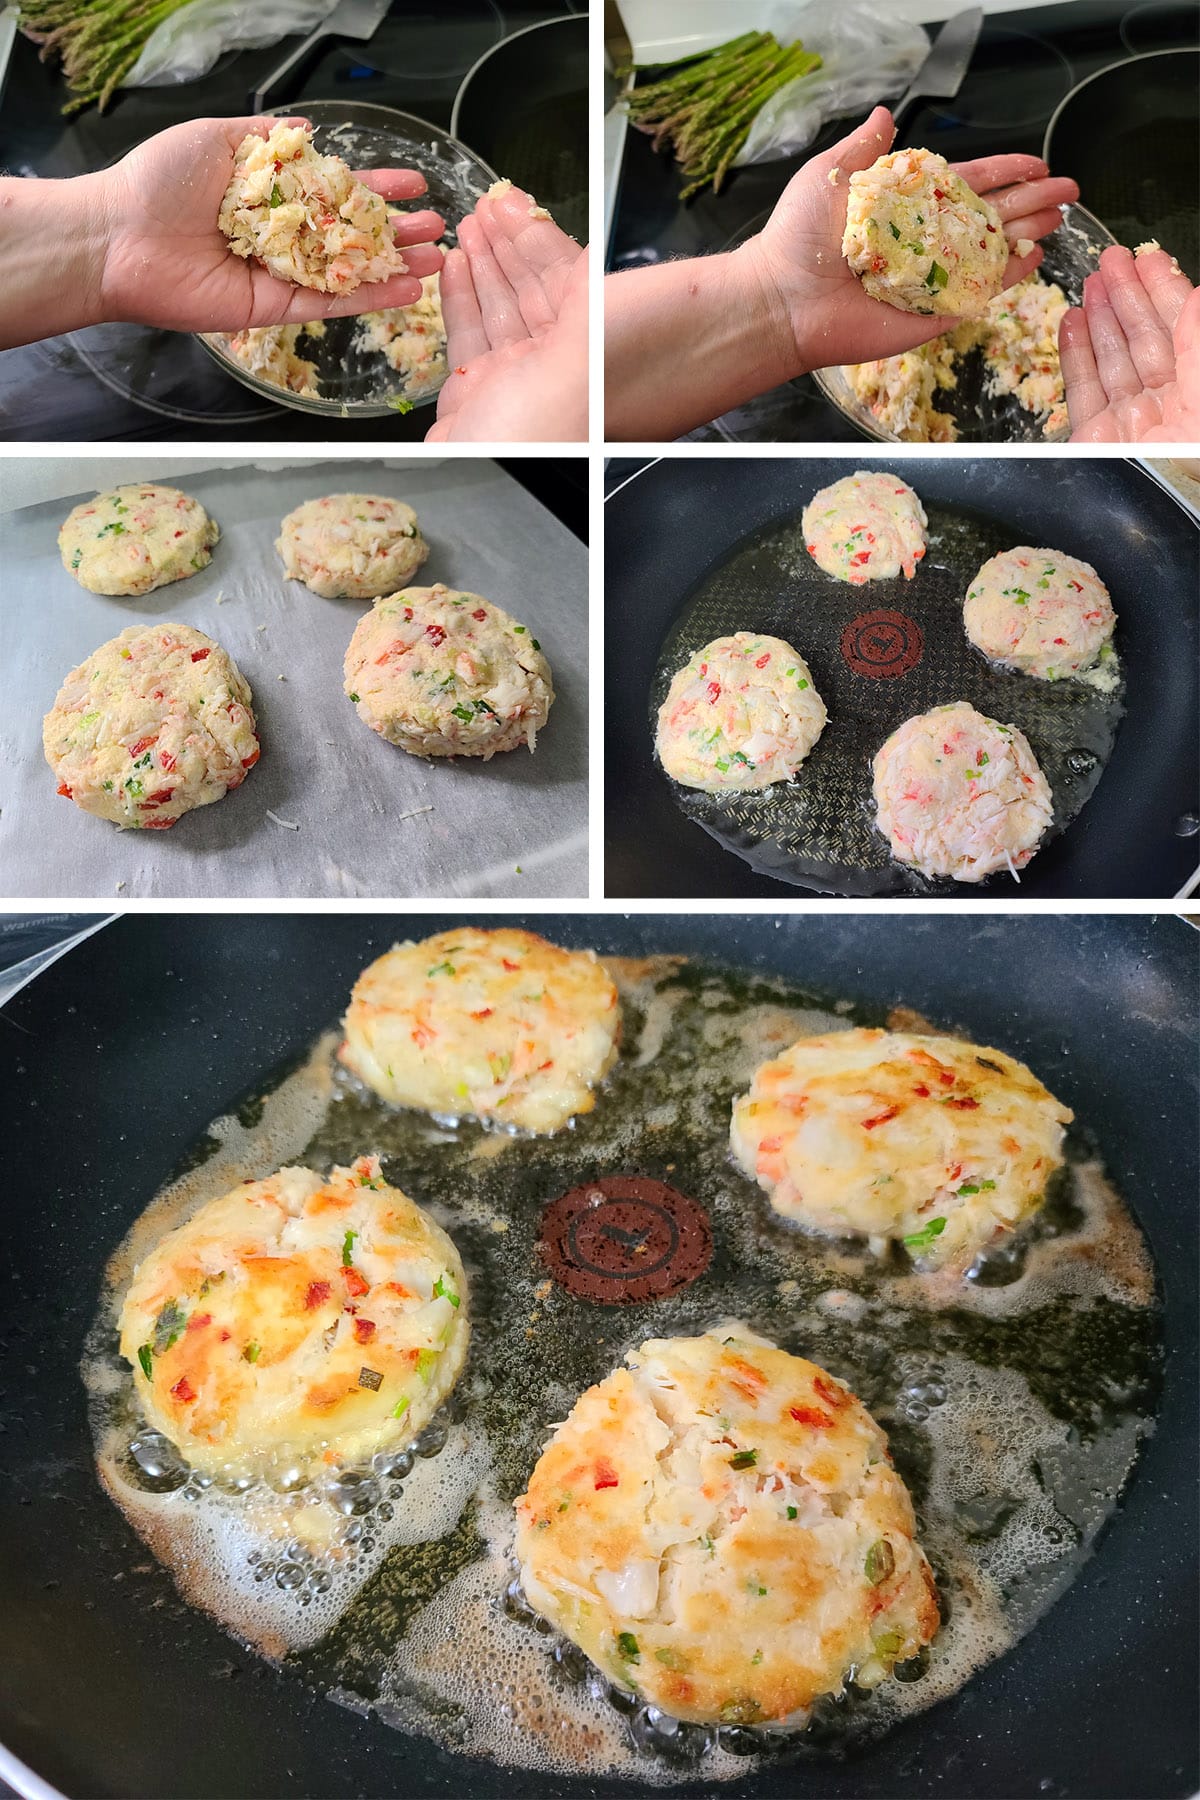 A 5 part image showing the gluten free crab cakes being formed and fried.